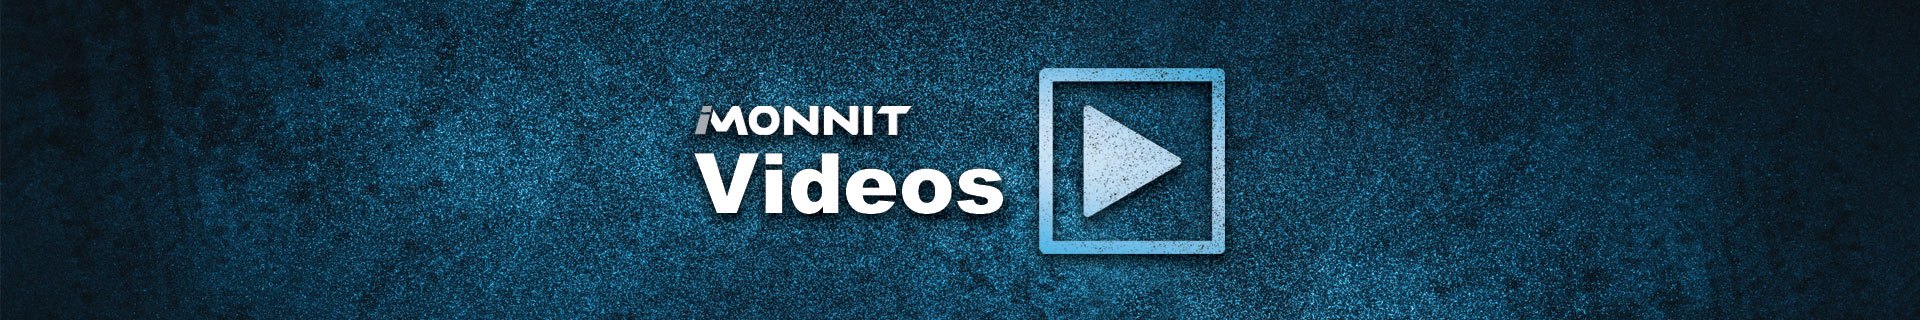 iMonnit support videos page masthead